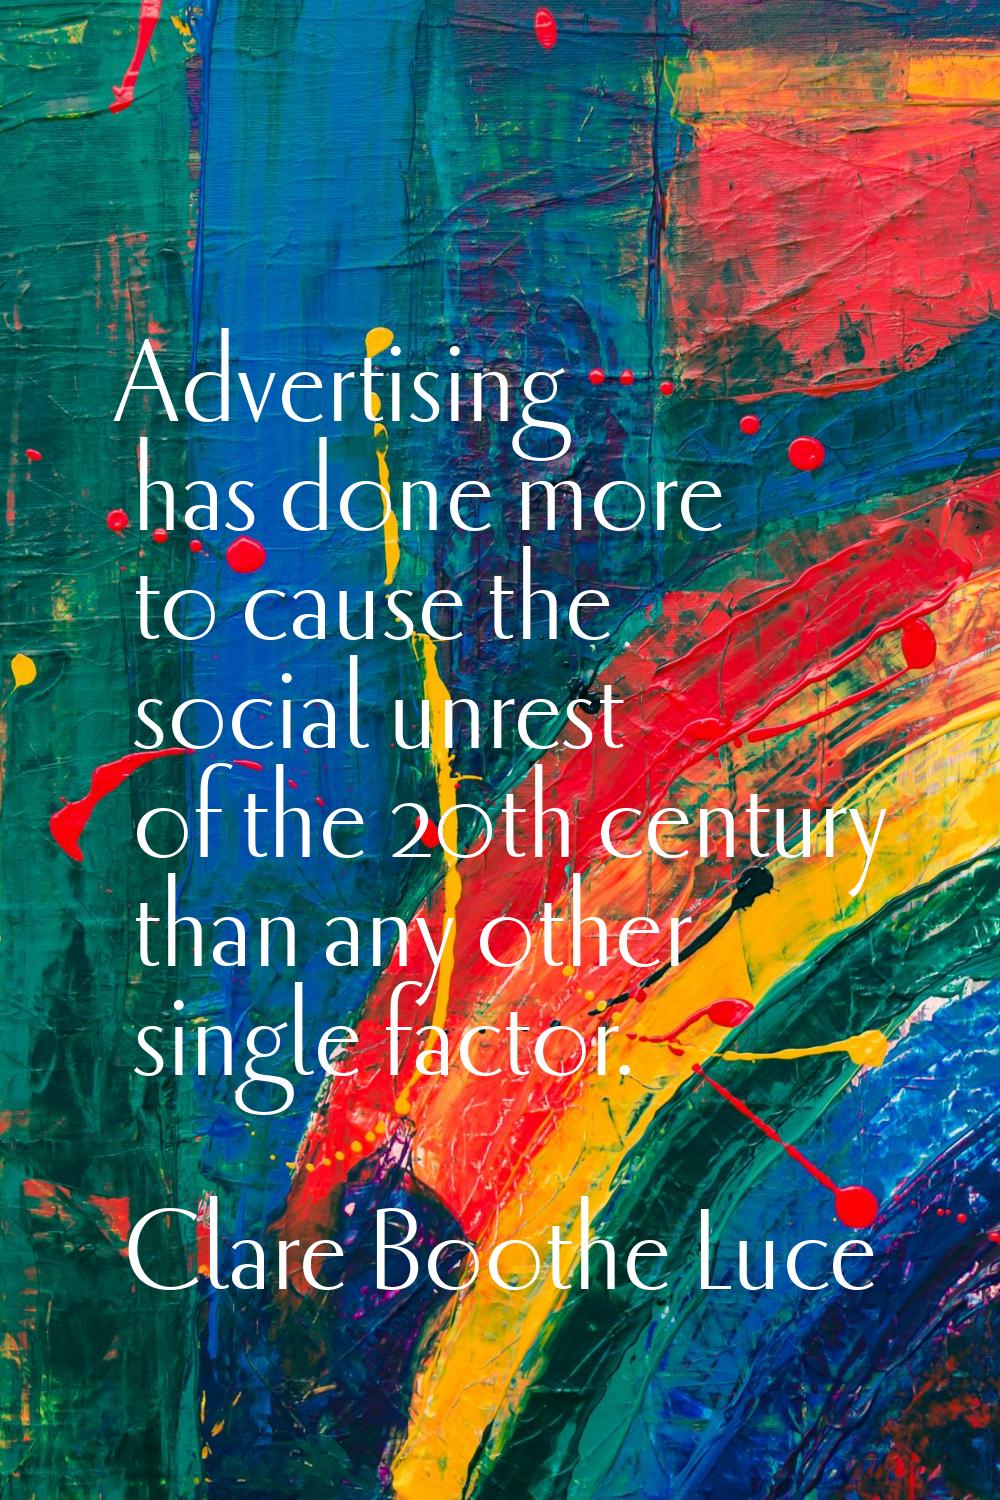 Advertising has done more to cause the social unrest of the 20th century than any other single fact